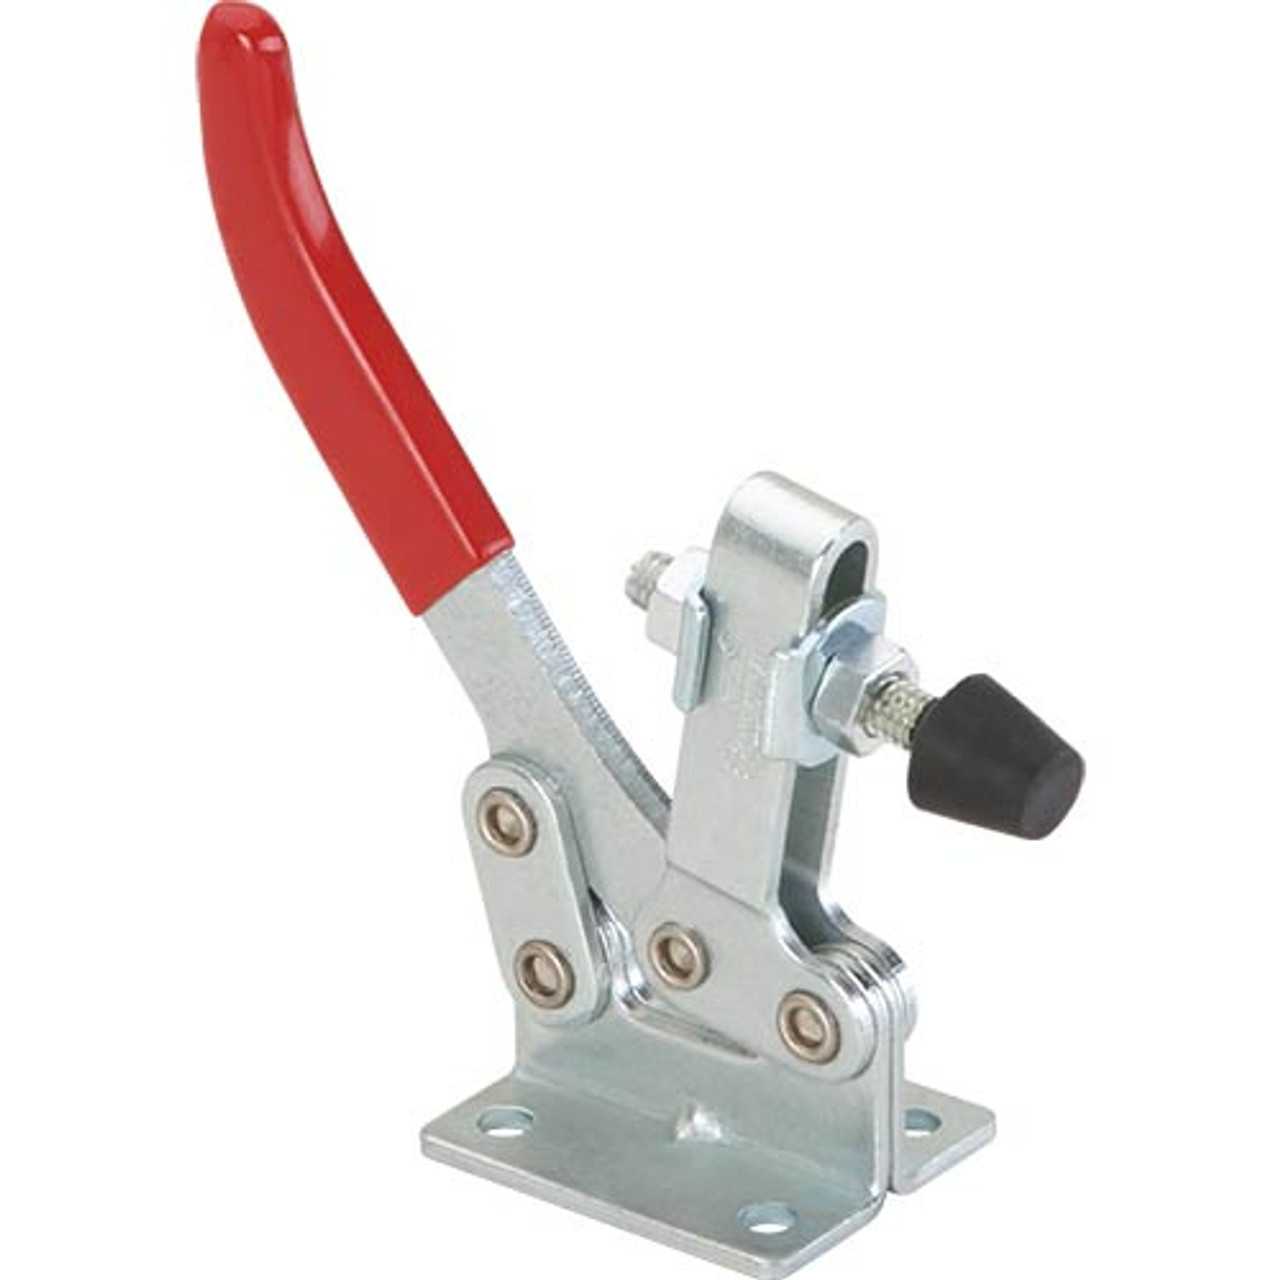 Woodstock Shop Fox 4-5/8" x 2" Clamp Down Quick Release Toggle Clamp D4152